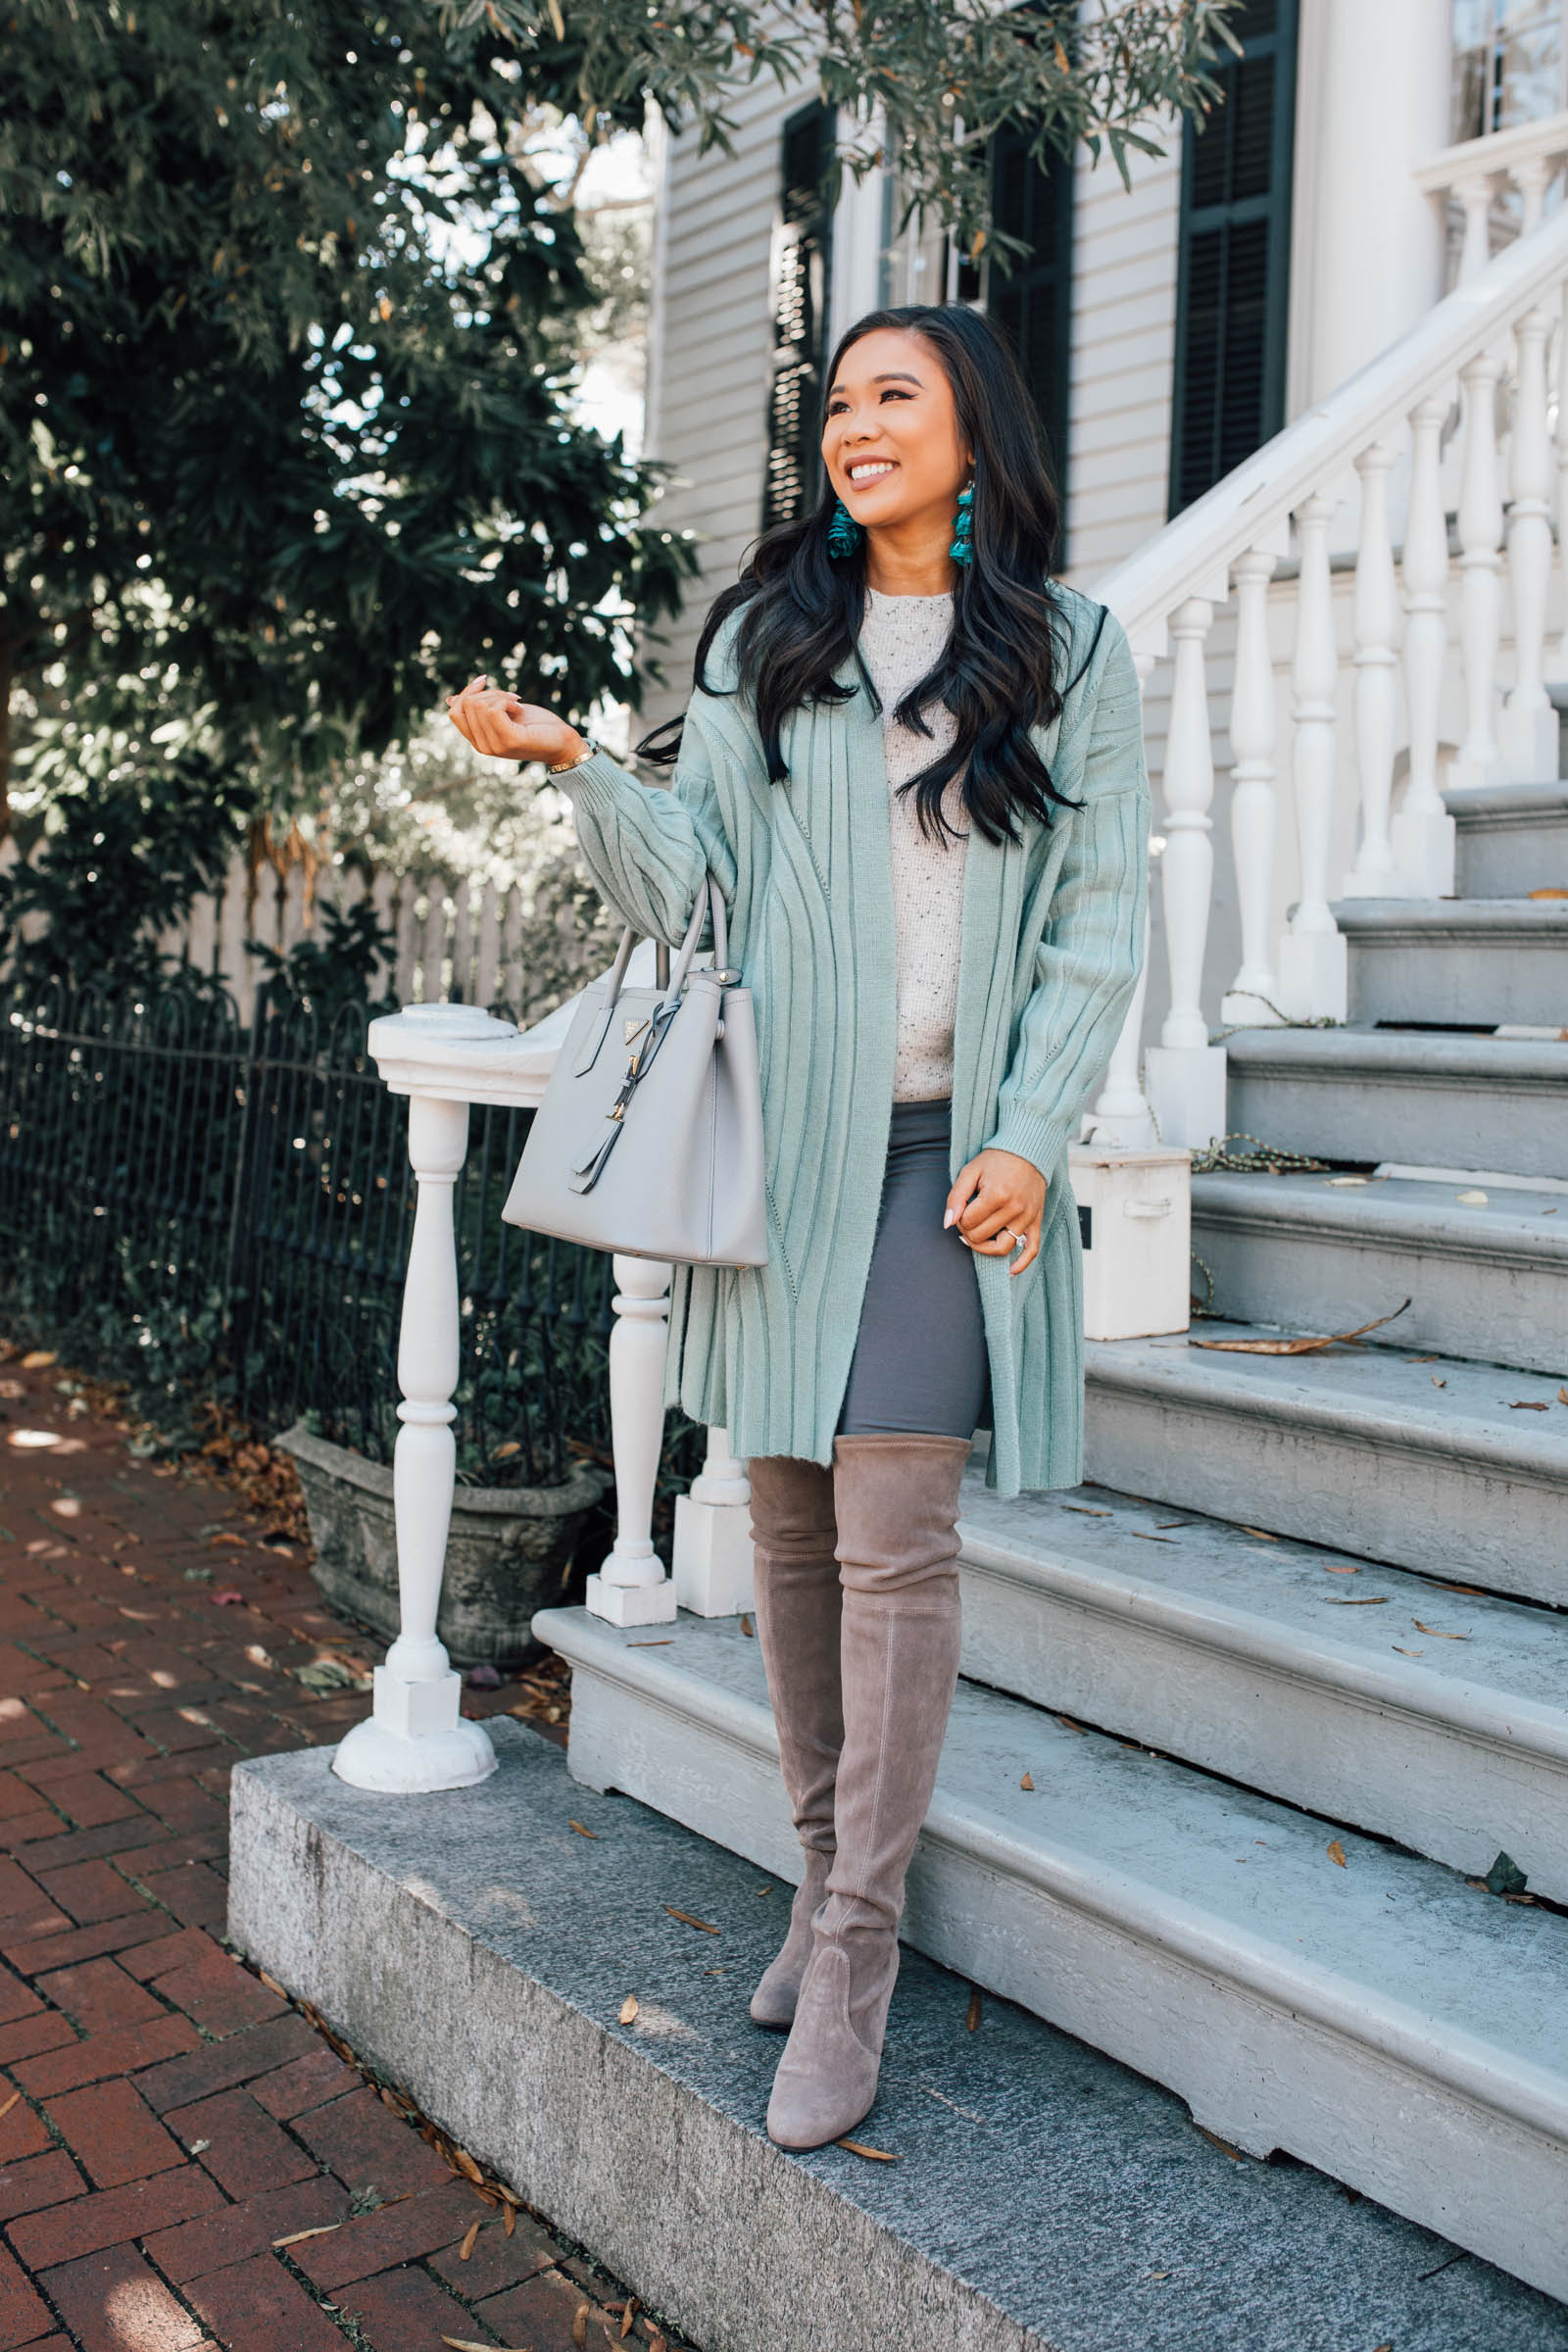 Blogger Hoang-Kim shares how to style a mint green cardigan with over-the-knee boots